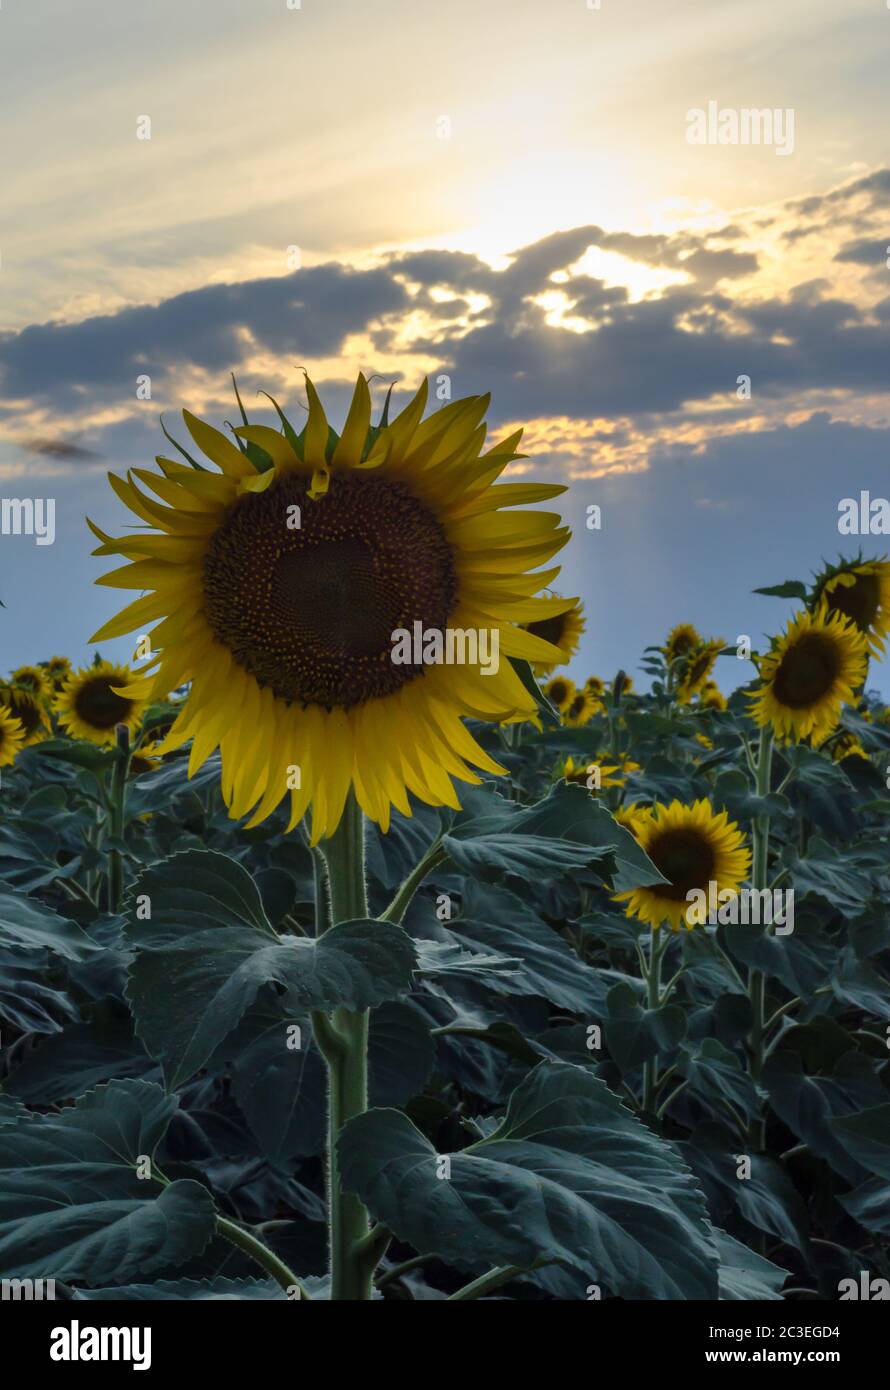 field of sunflowers with a large flower and sun rays at sunset Stock Photo